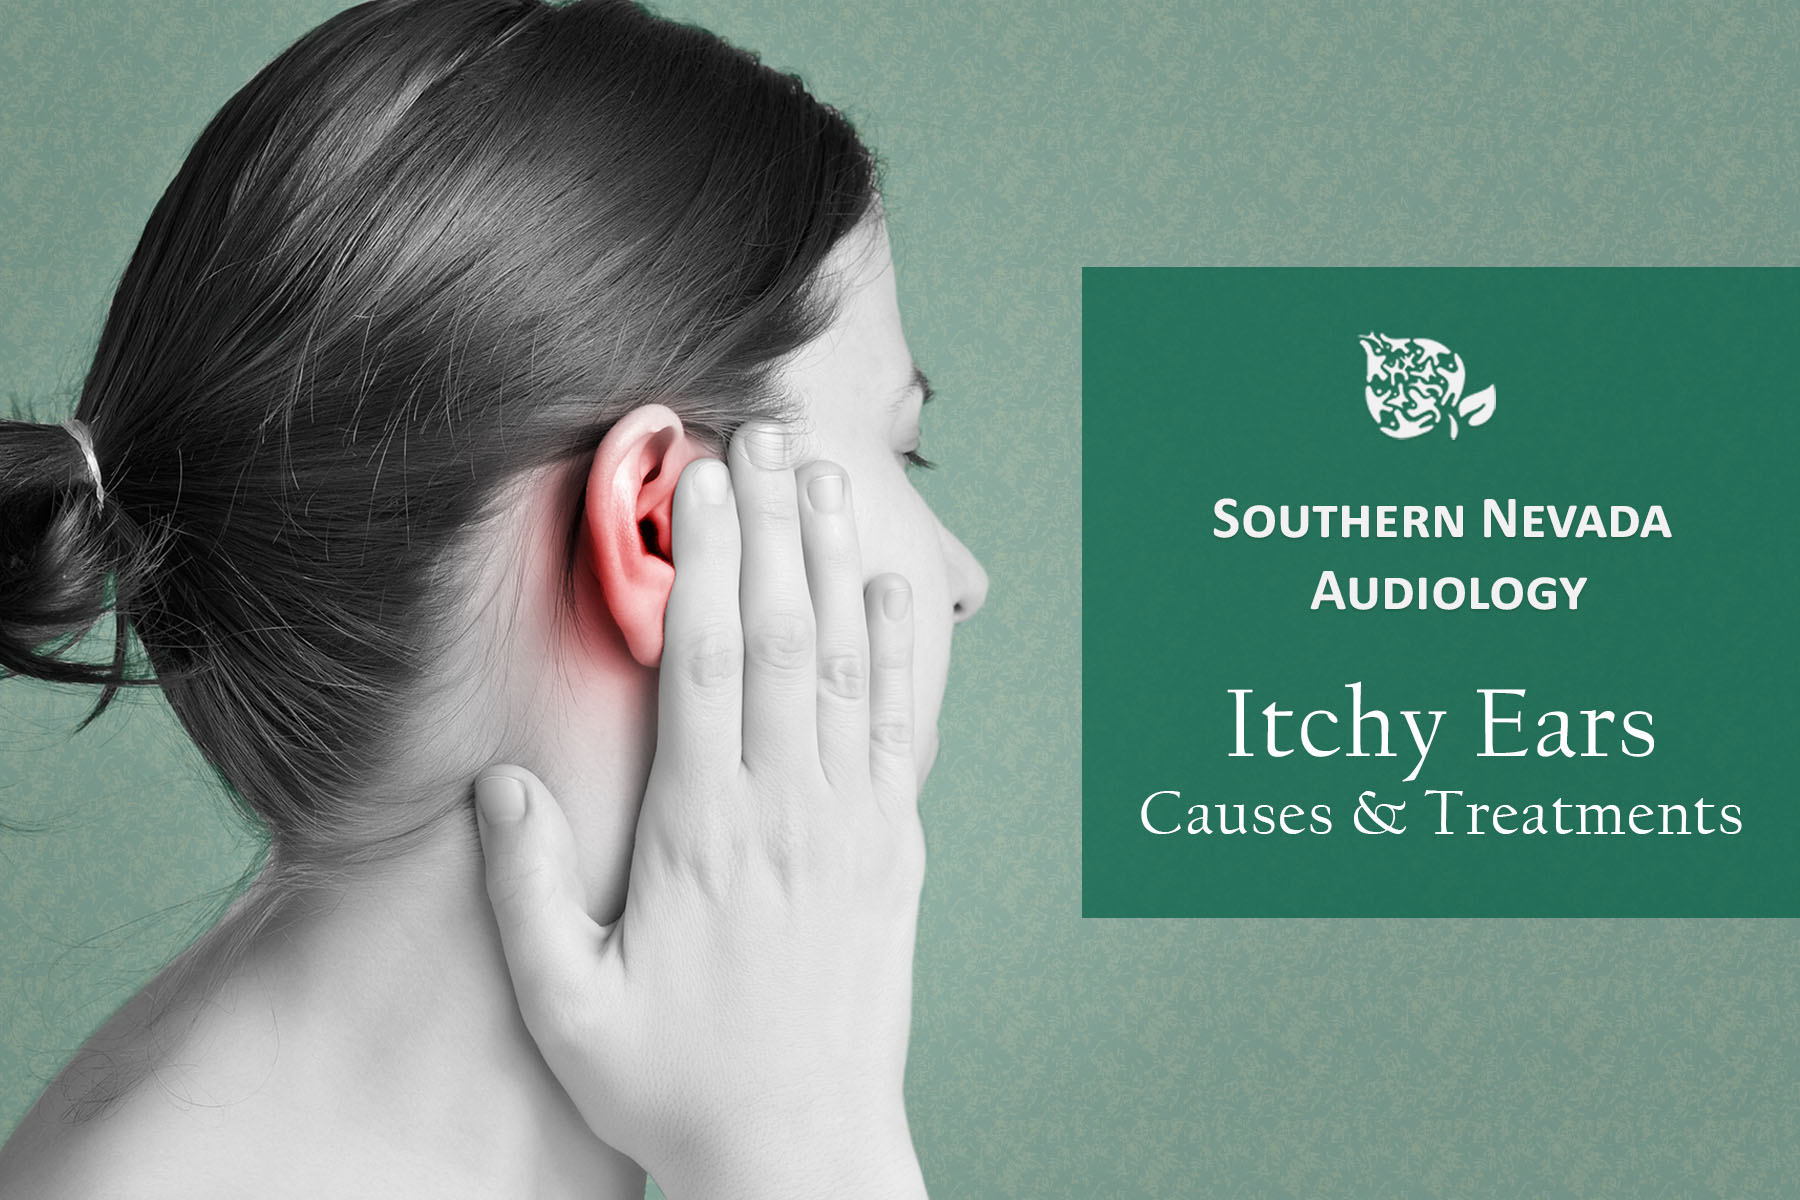 Itchy Ears – Causes & Treatments